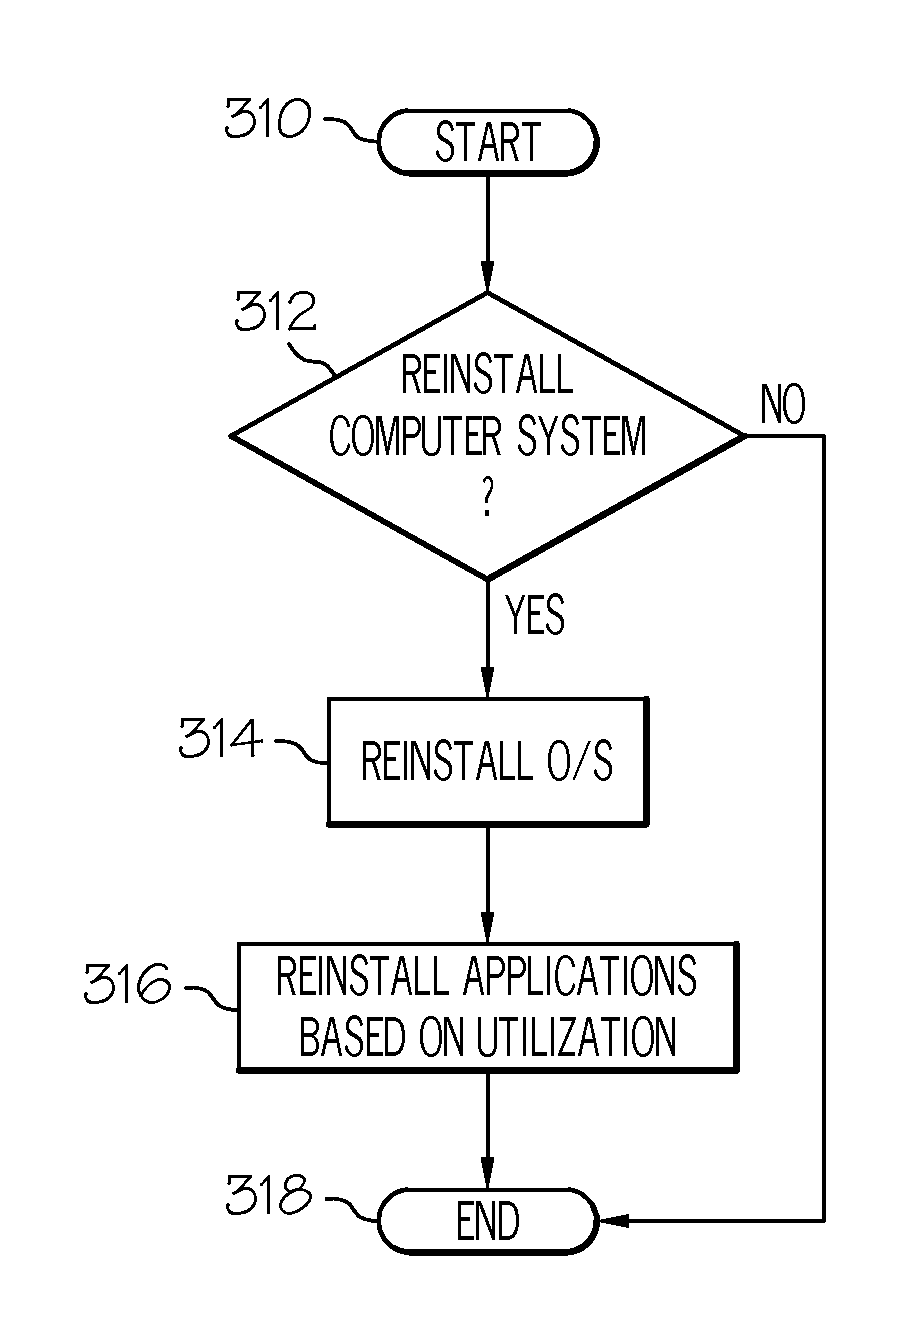 Method of reinstalling a computer based on frequency of application utilization